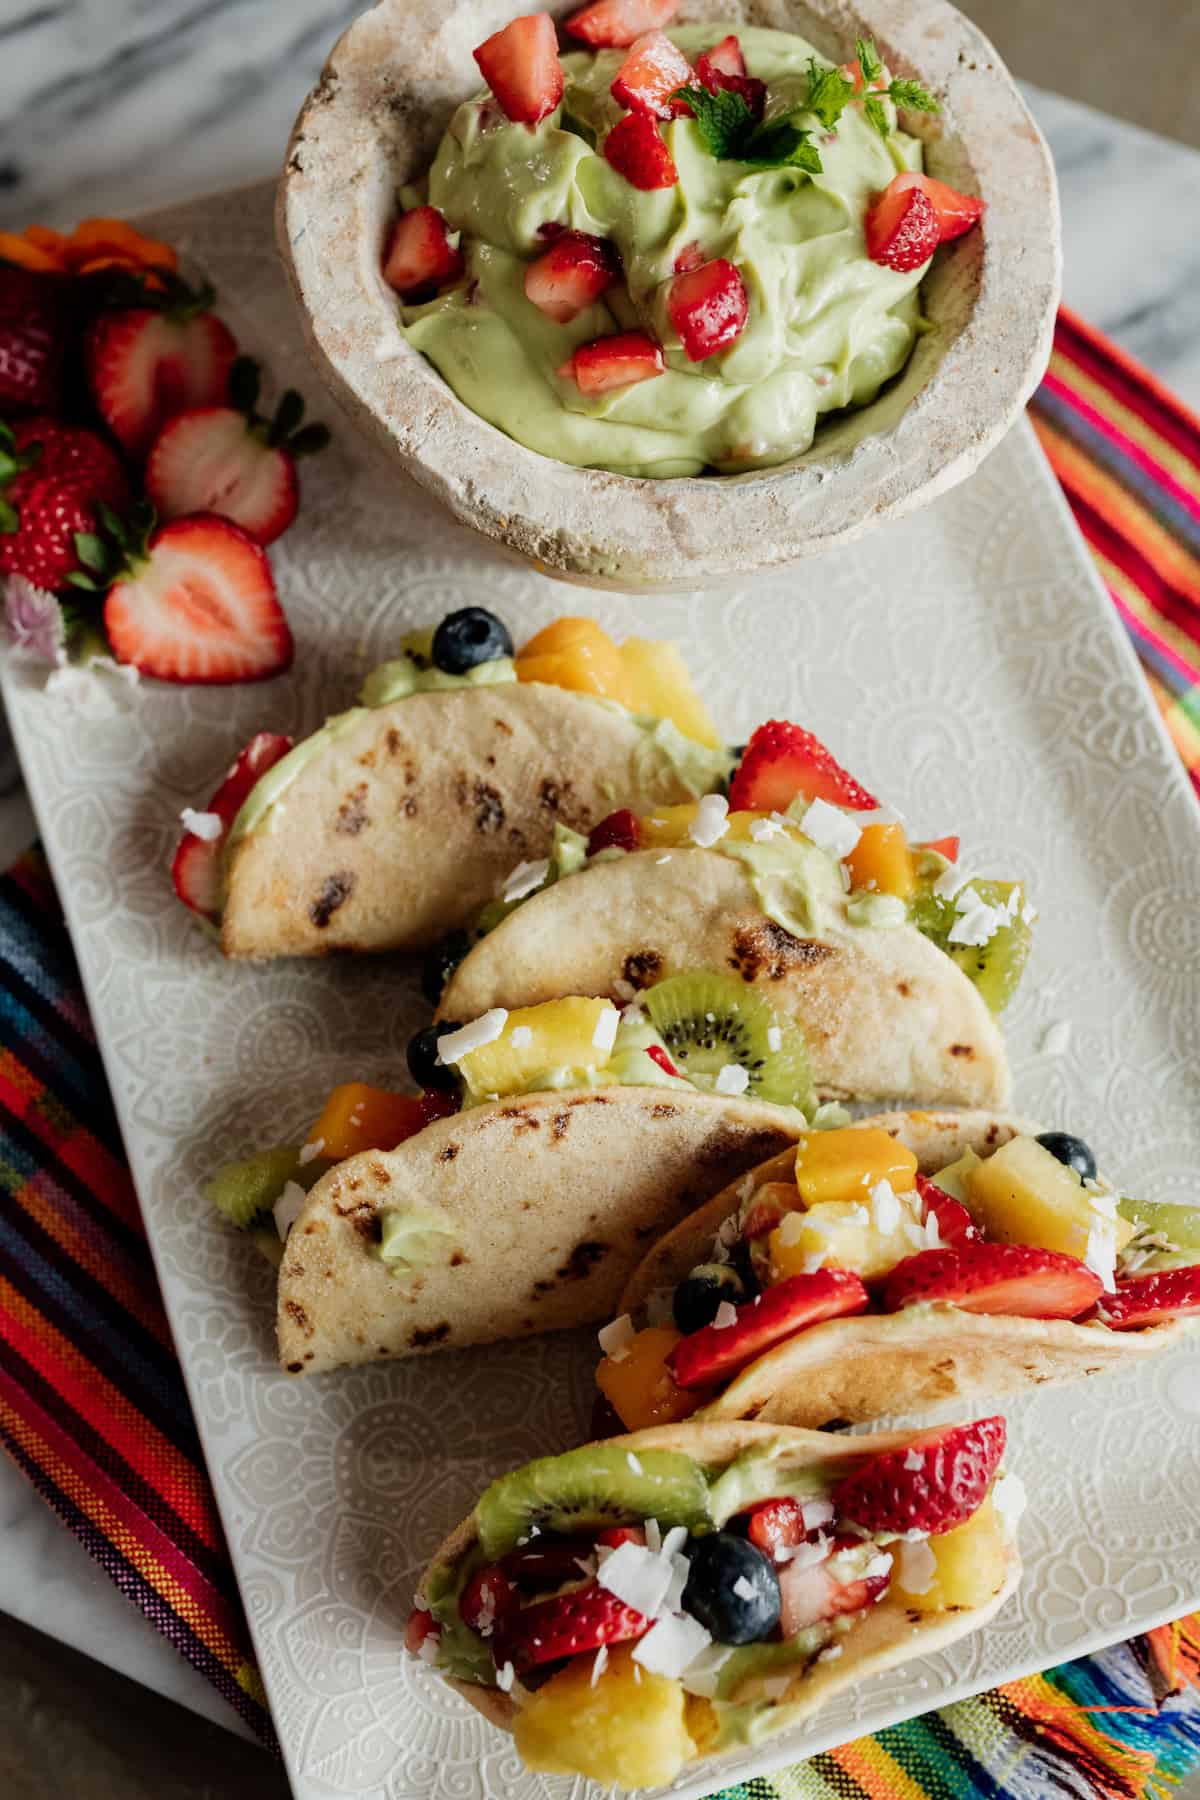 dessert tacos filled with avocado yogurt cheesecake filling and sliced fruits and berries on a white platter.